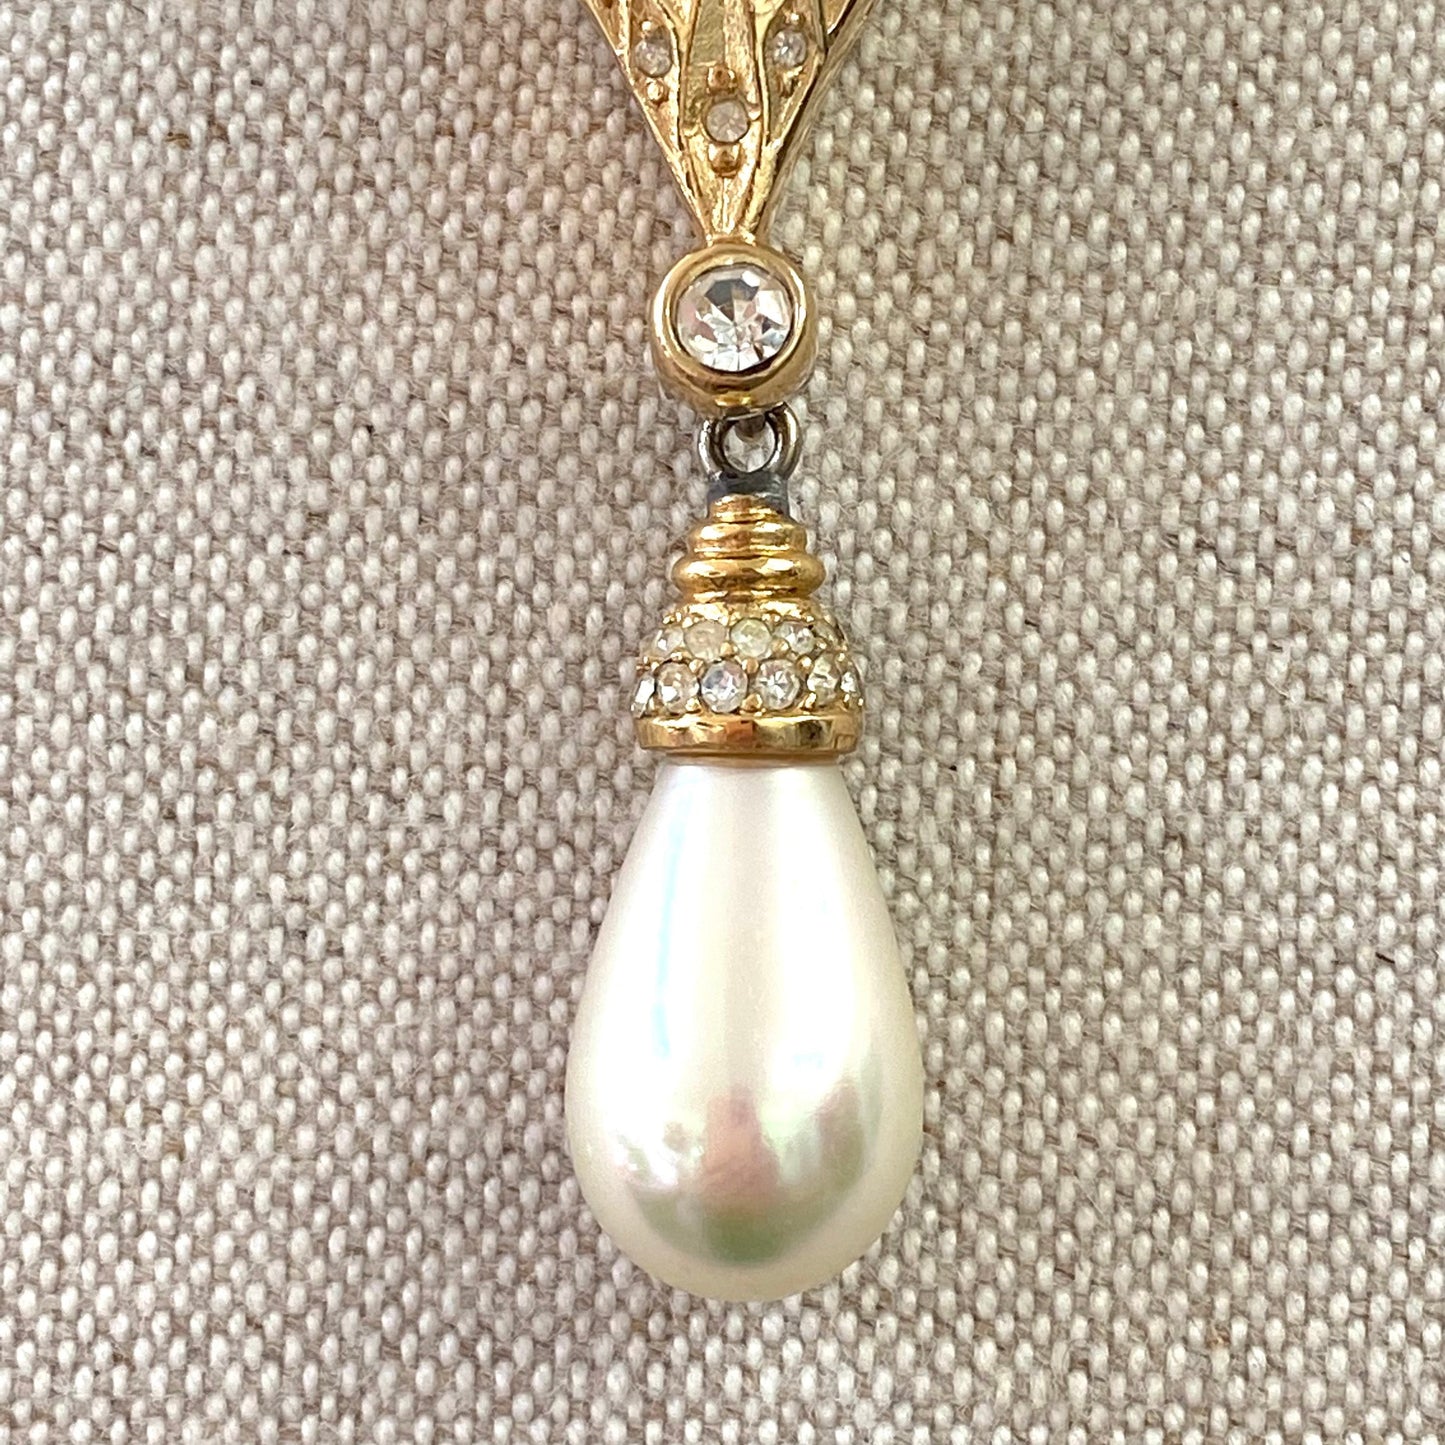 Christian Dior Flex Necklace with Swarovski Crystal Set Feature and Faux Teardrop Pearl